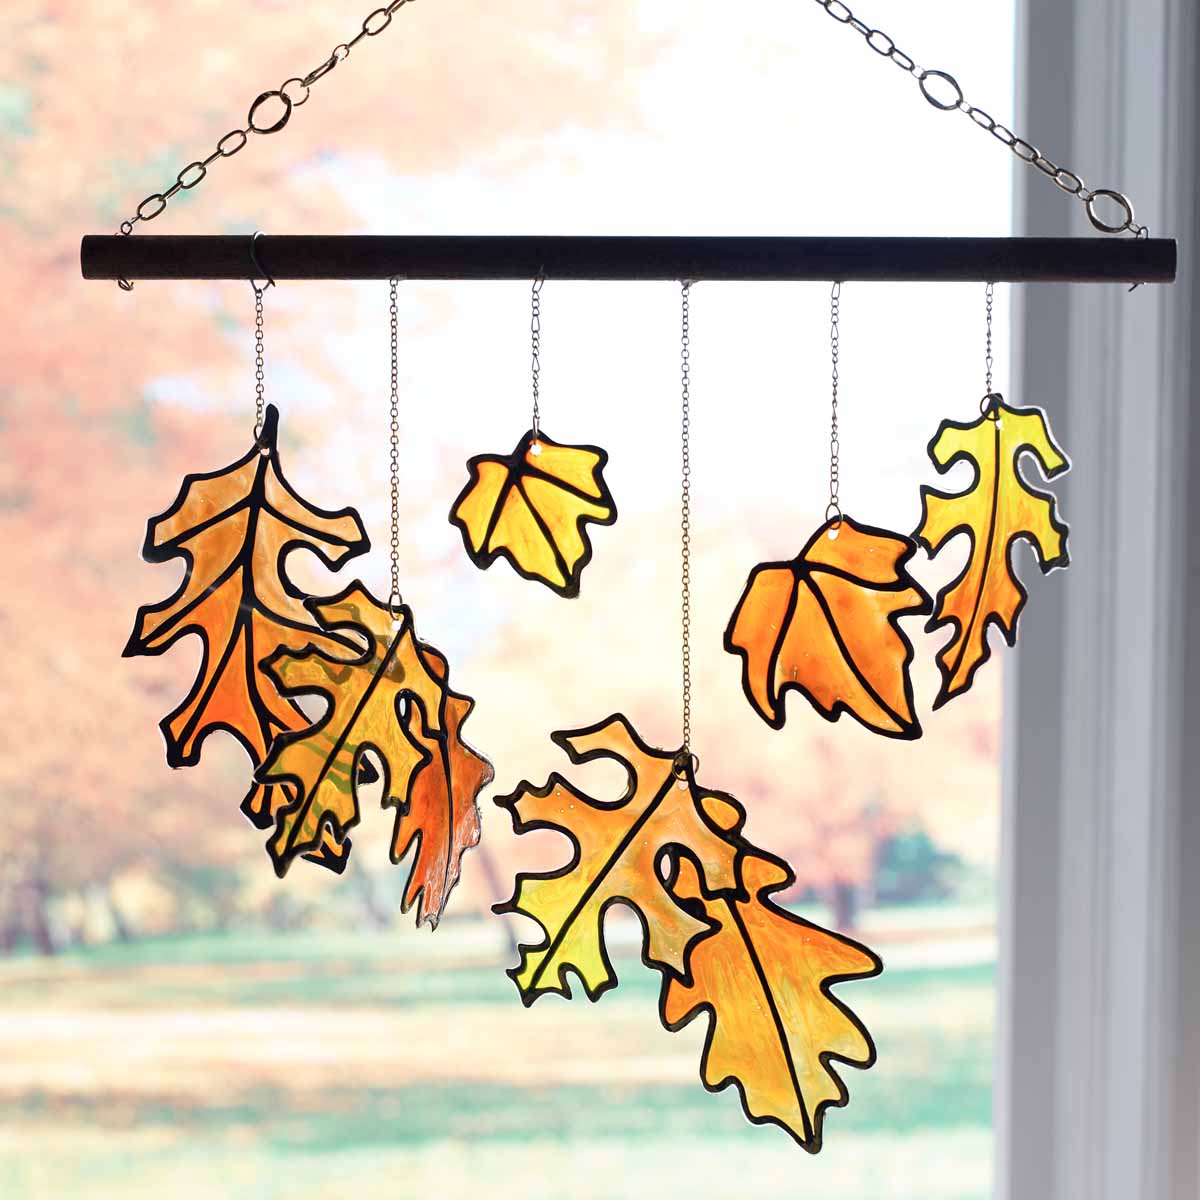 Gallery Glass Fall Leaves Mobile